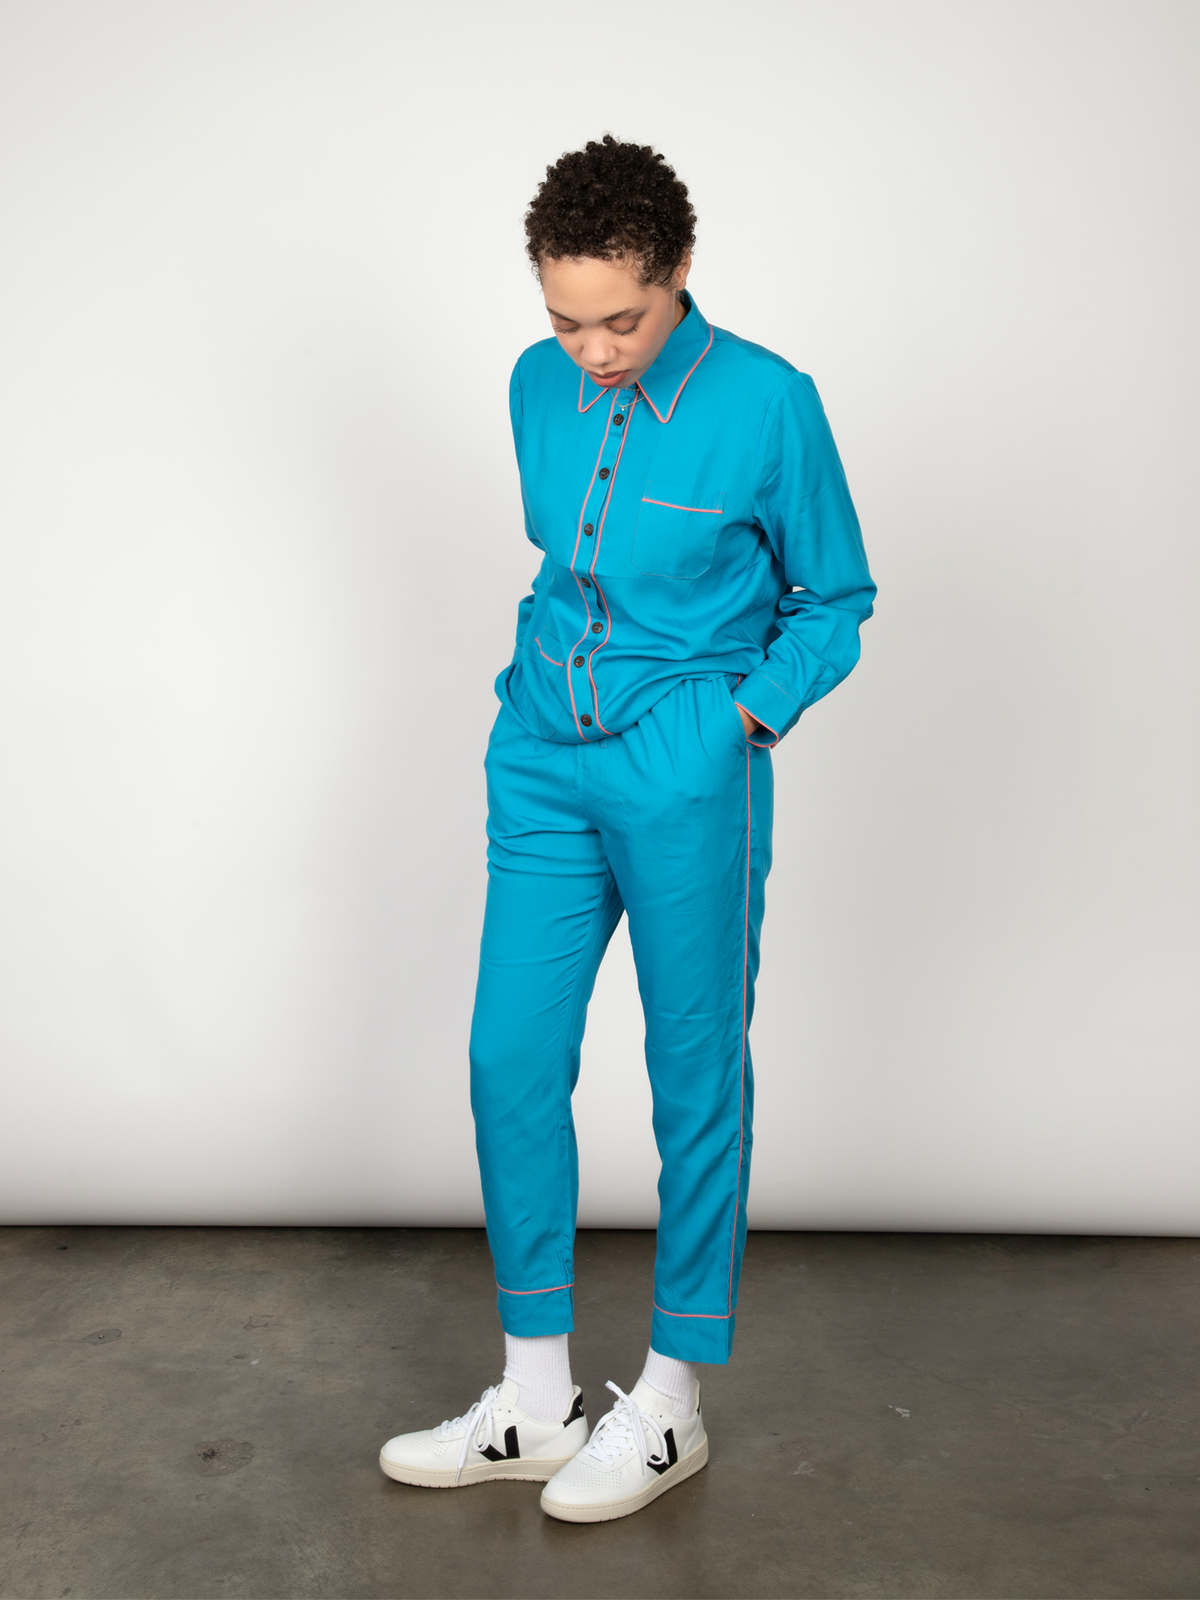 Woman wears a blue pajama set and poses in a studio.